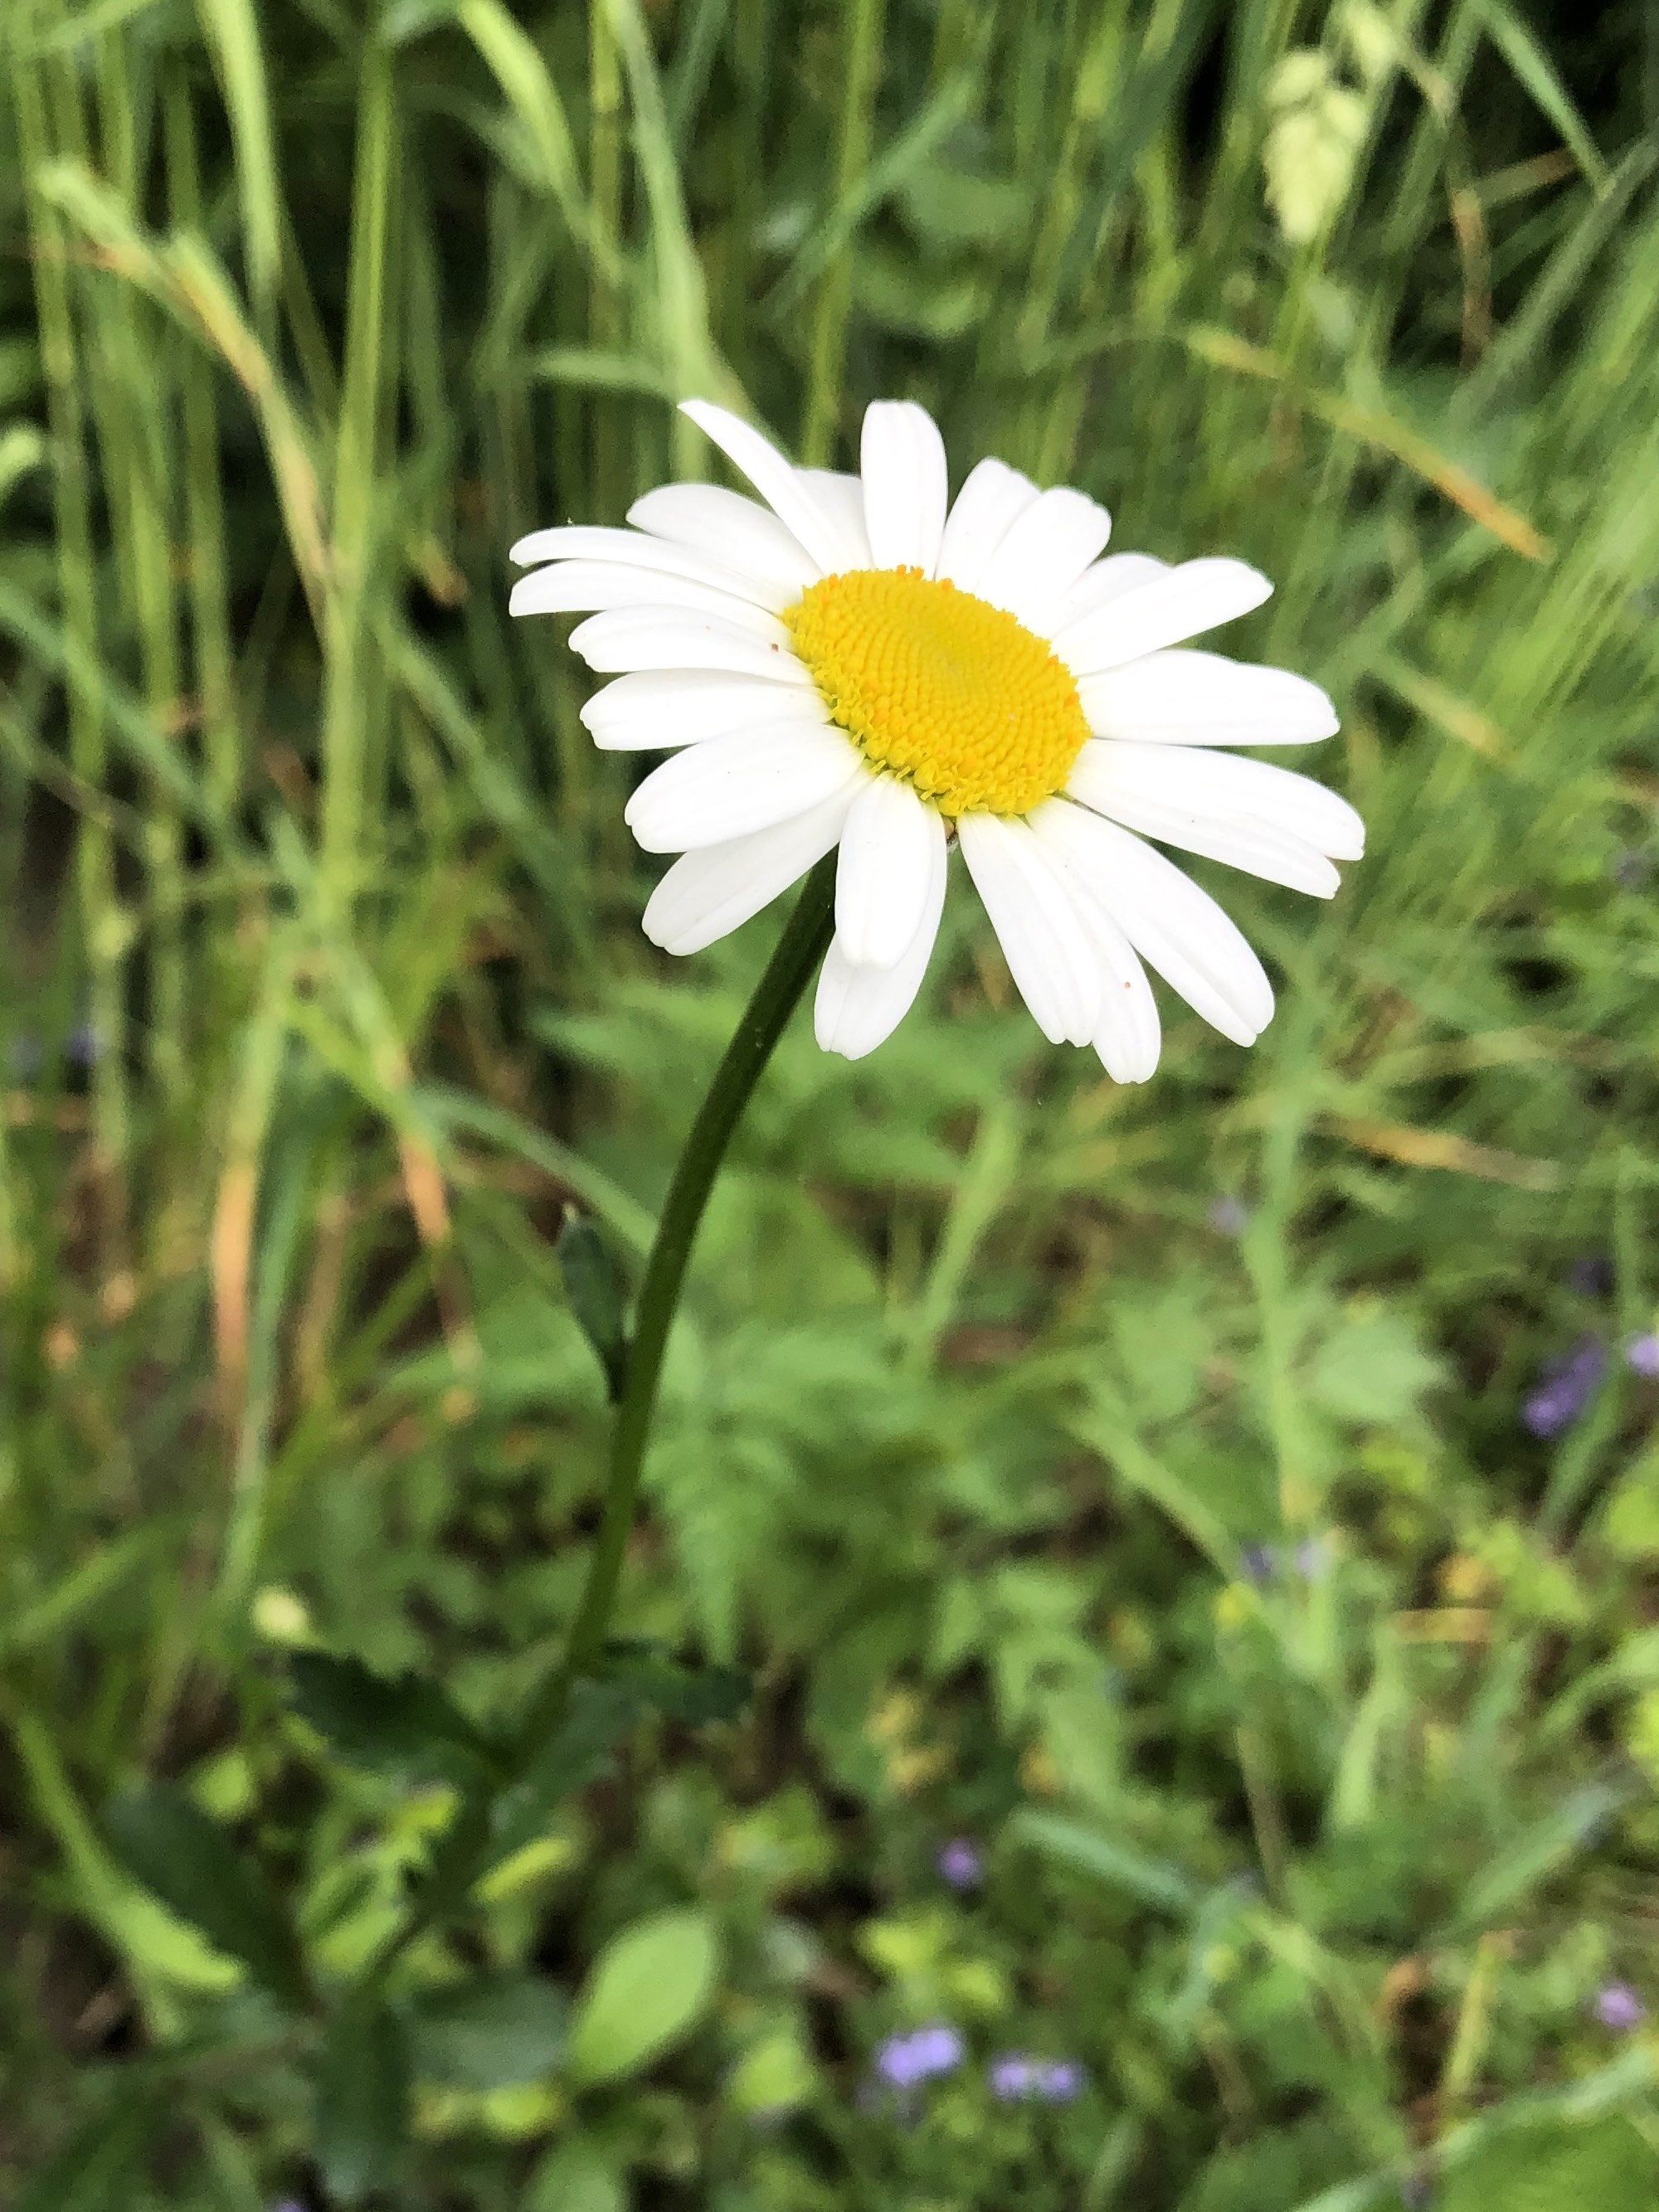 Ox-eye Daisies on bank of retaining pond in Madison, Wisconsin on June 12, 2020.